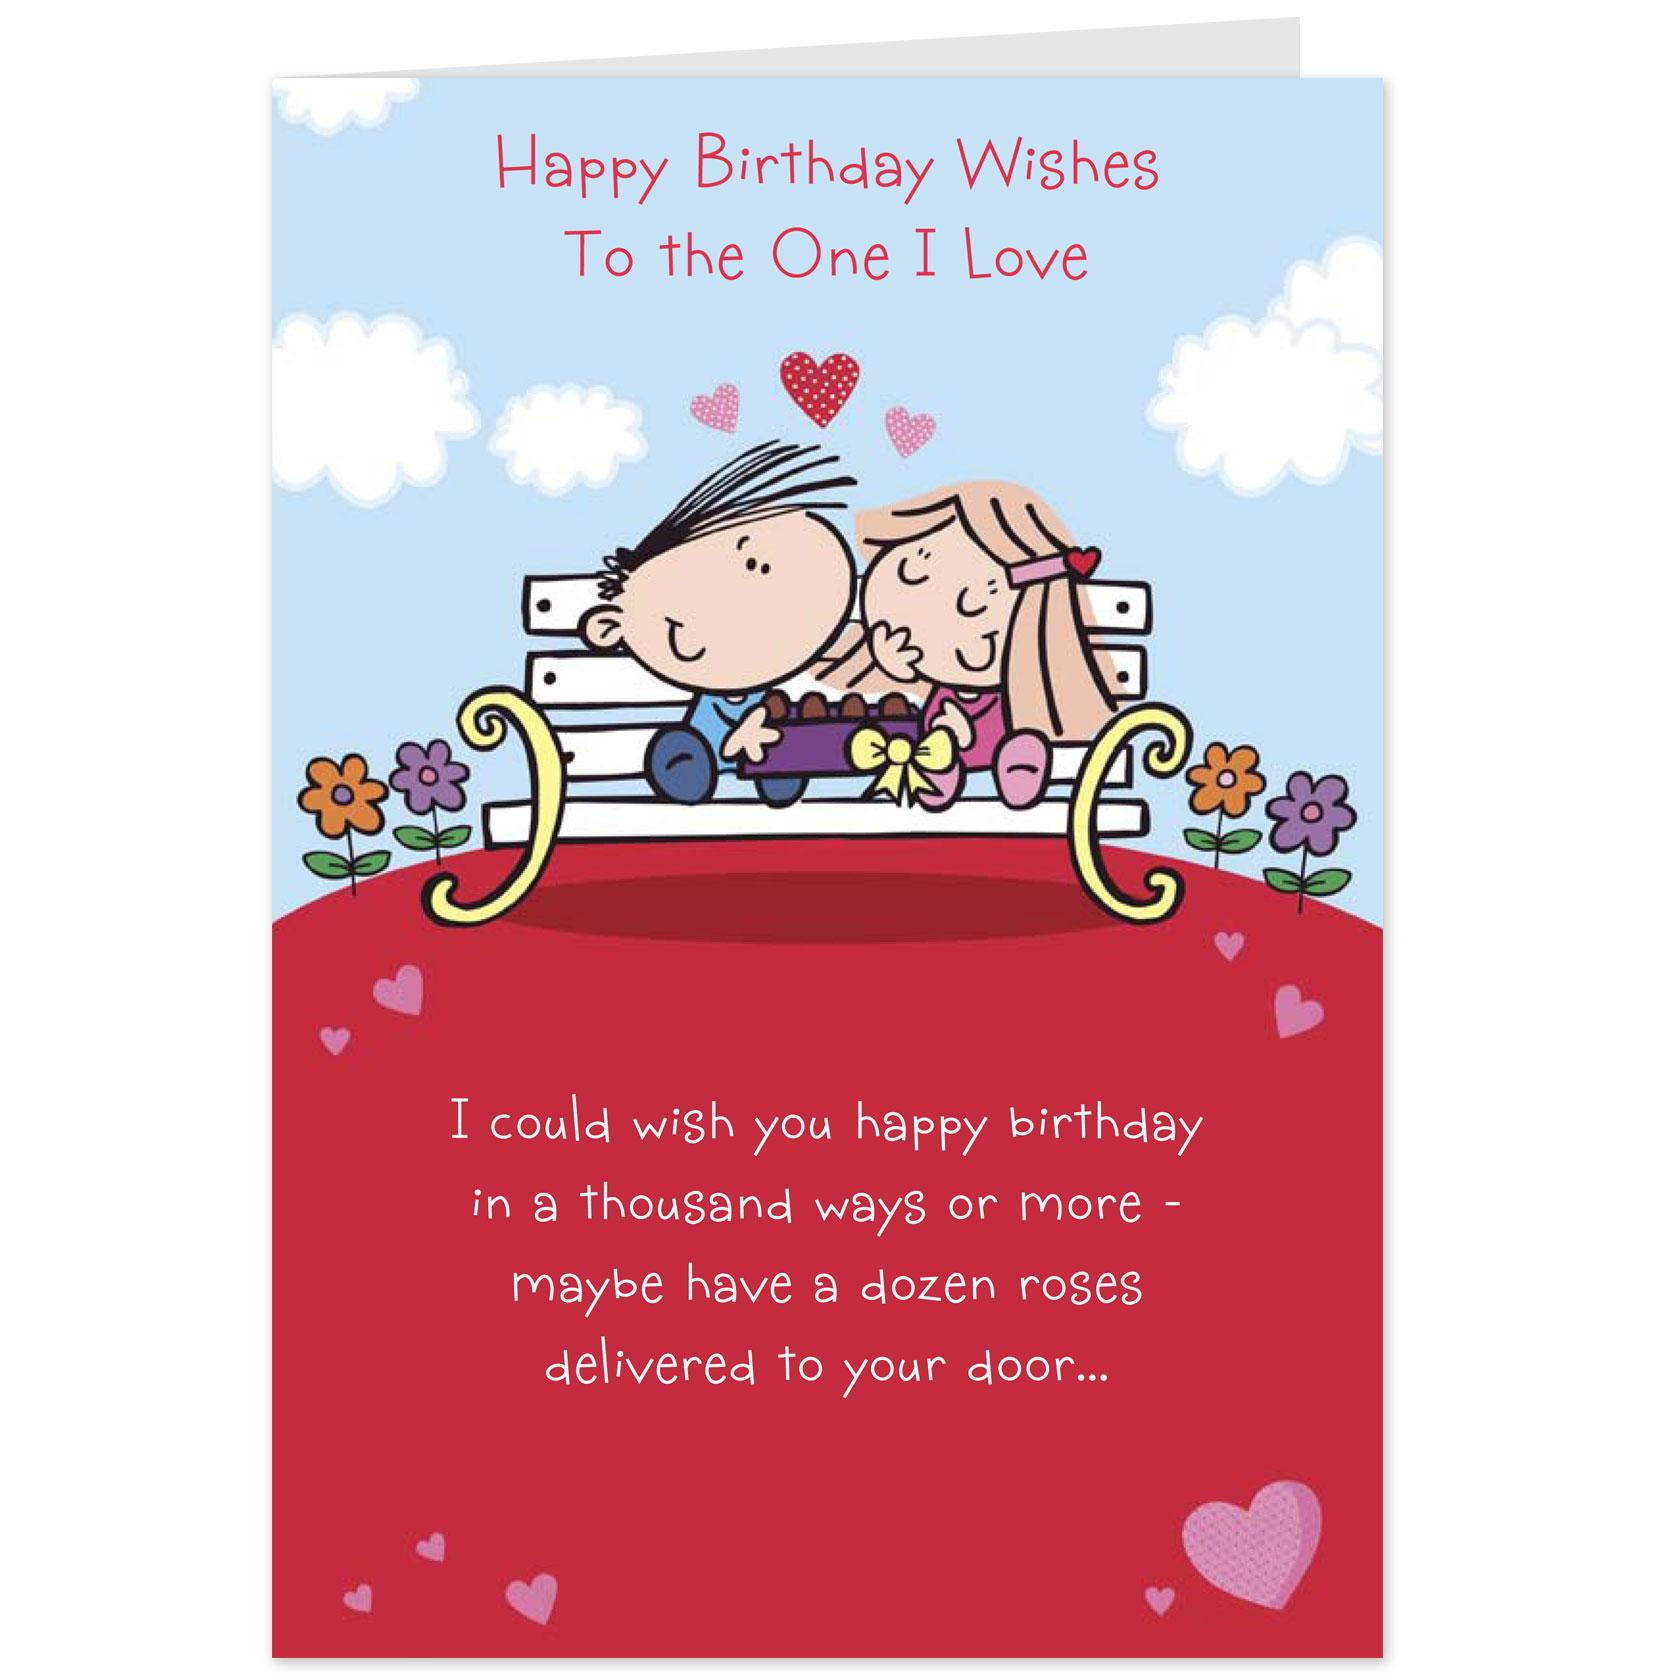 Funny Birthday Card Quotes
 Funny Happy Birthday Quotes For Him QuotesGram